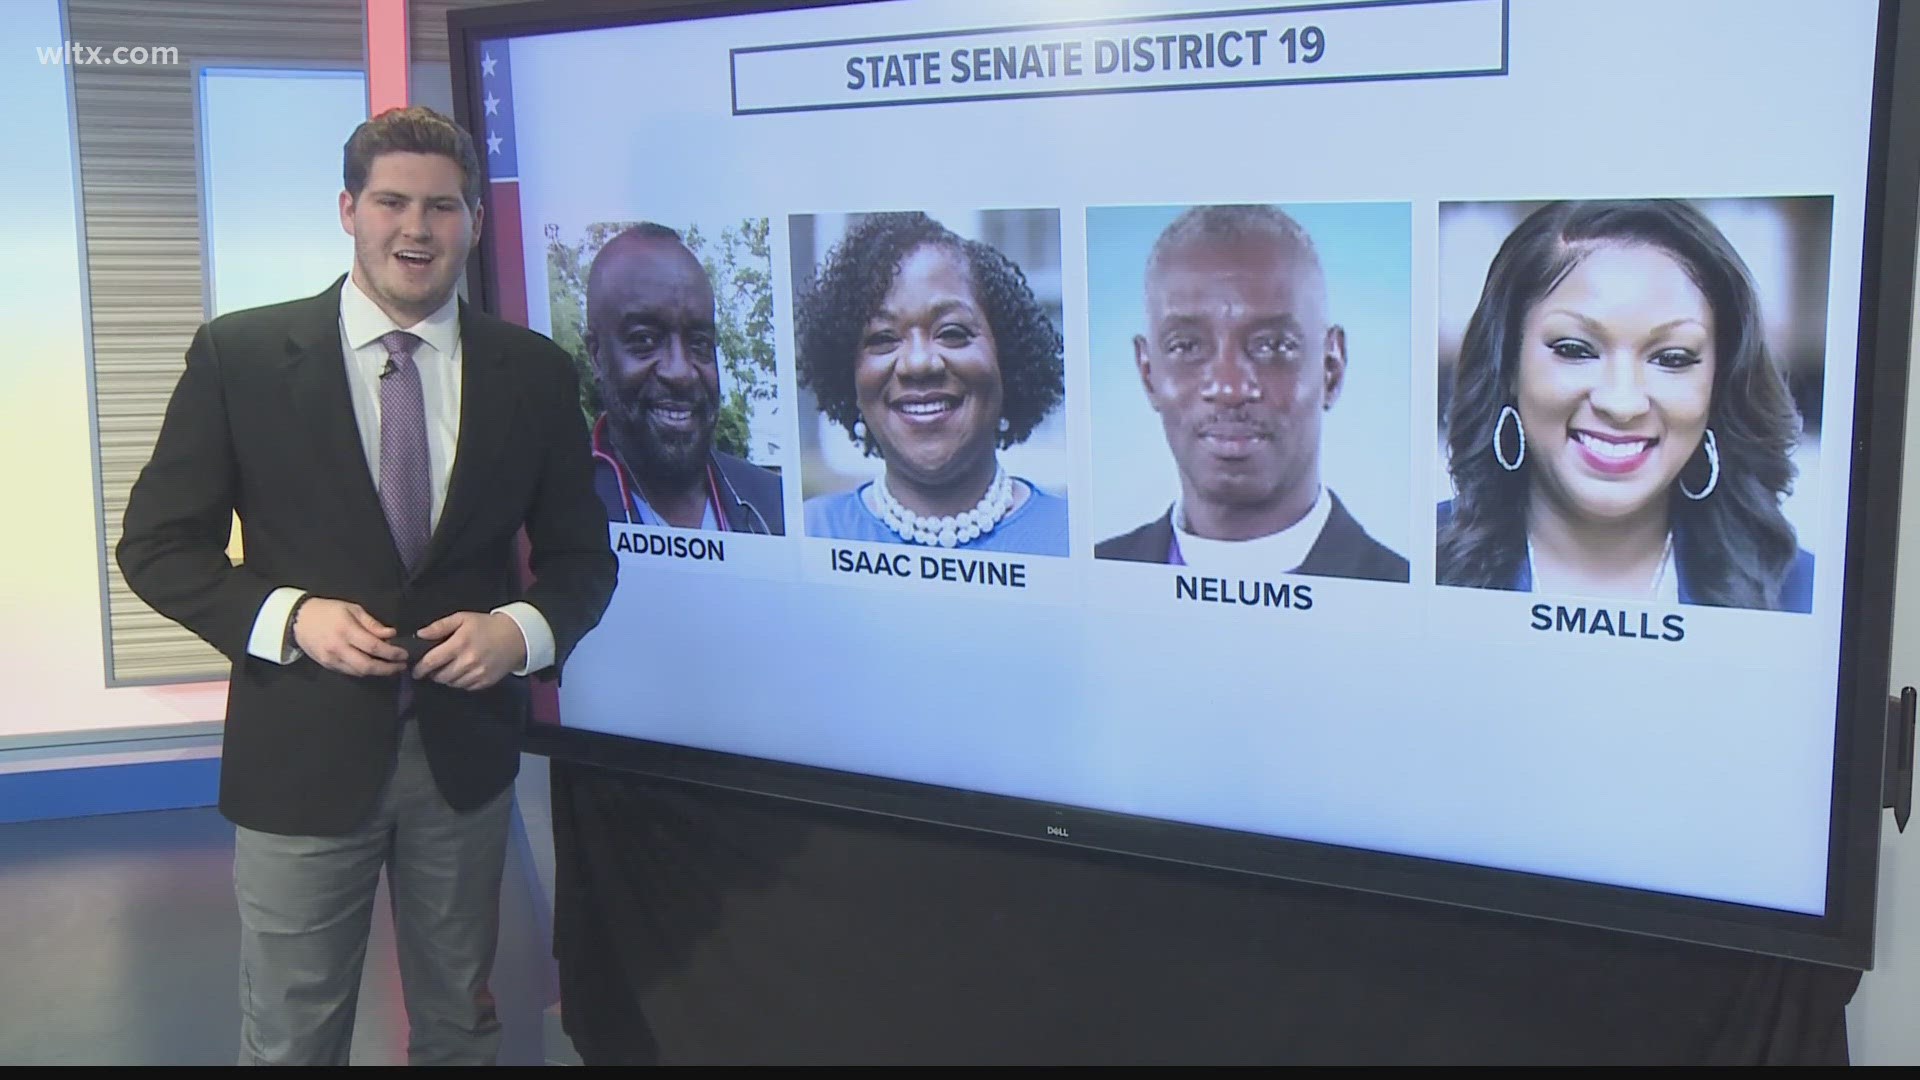 Four candidates are running to fill the Senate District 19 seat after following the death of the late Senator John Scott.